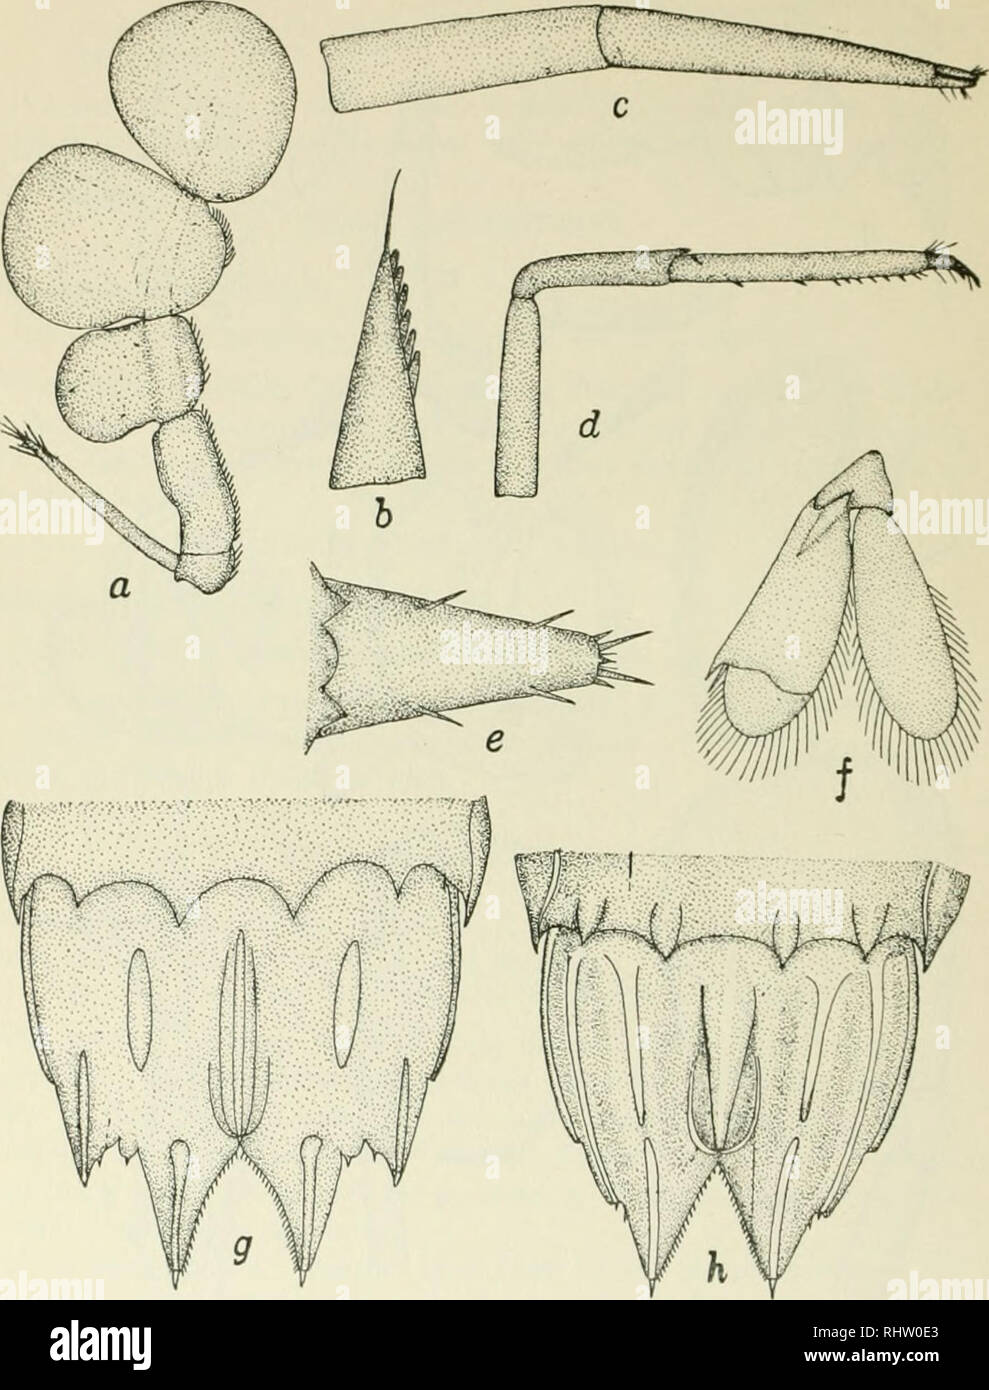 . Bernice P. Bishop Museum bulletin. Natural history; Ethnology; Botany. 32 Benticc P. Bishop Museum—BuUcliii. Figure 3. Camera lucida drawings of features of Hyiiicnod-ro clcgims, and telsons of Gonodactyhis chiragra and Gonodactylus chiragra var. siiiithii: a. third maxillipcd of left side X 6; fr. serrated spinulc of medial border of second segment of third maxilliped (greatly enlarged) ; c, terminal segments of first walking leg X 10; d, posterior walking leg X 6: c, dorsal surface of telson X 6; f, uropod of left side X 5 g, telson of Gonodactylus chiragra var. smithii X g; h, telson of  Stock Photo